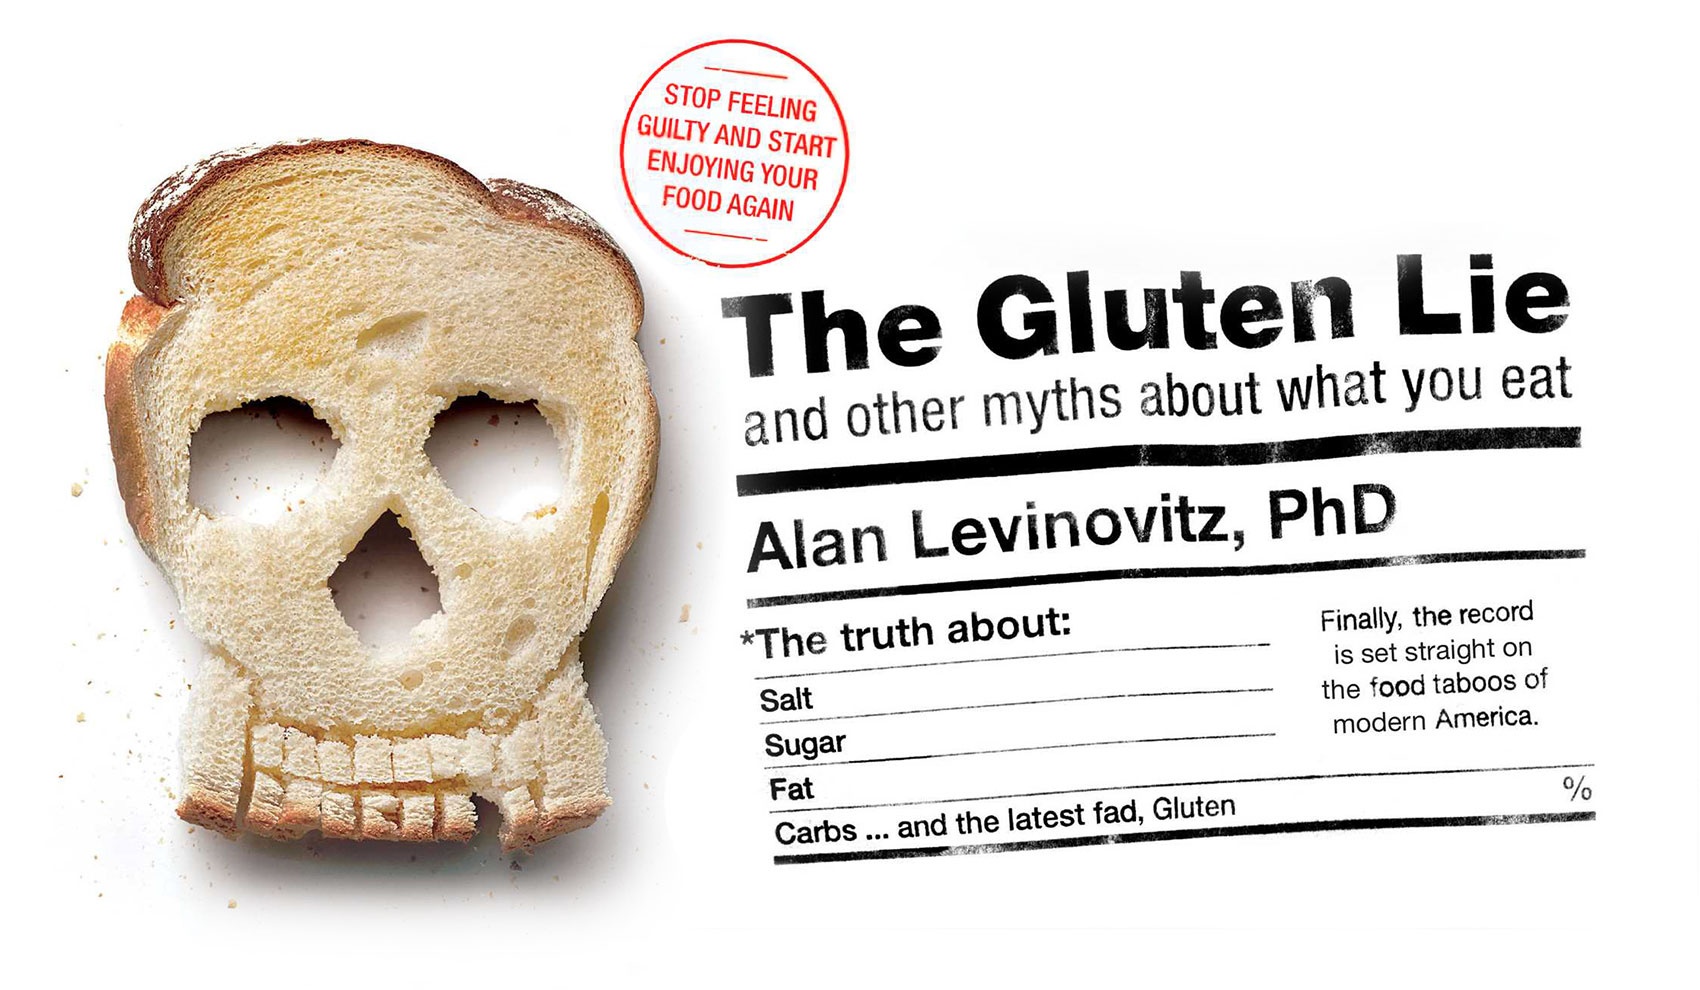 Reconfigured elements form the cover of The Gluten Lie: and other myths about what you eat